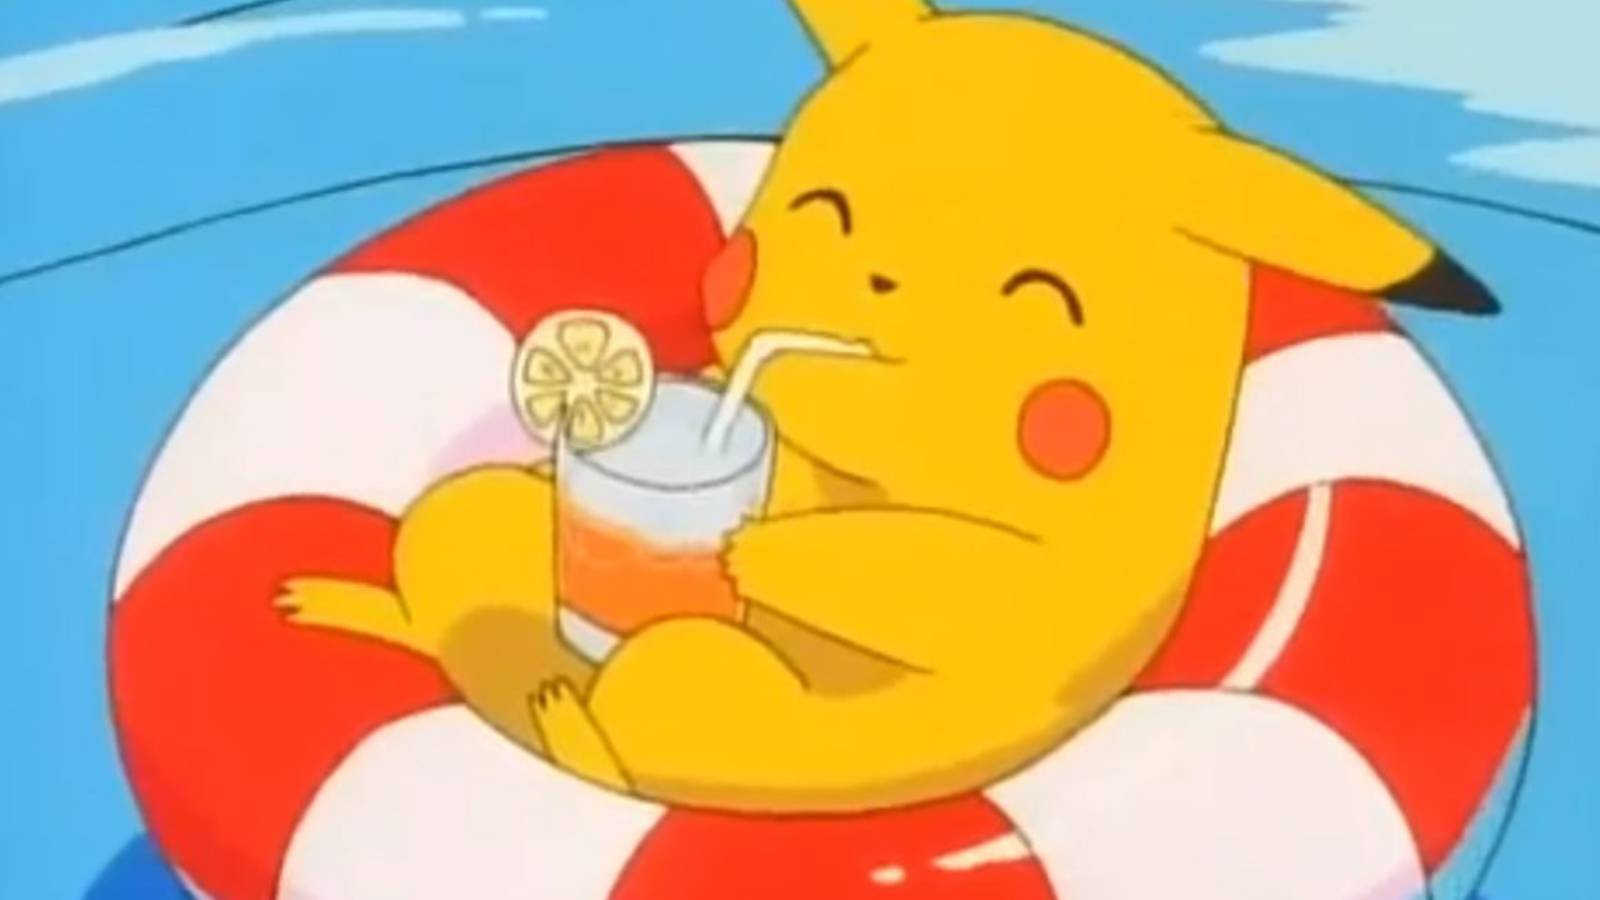 A screenshot from the Pokemon anime shows Pikachu relaxing in a rubber ring and sipping a drink